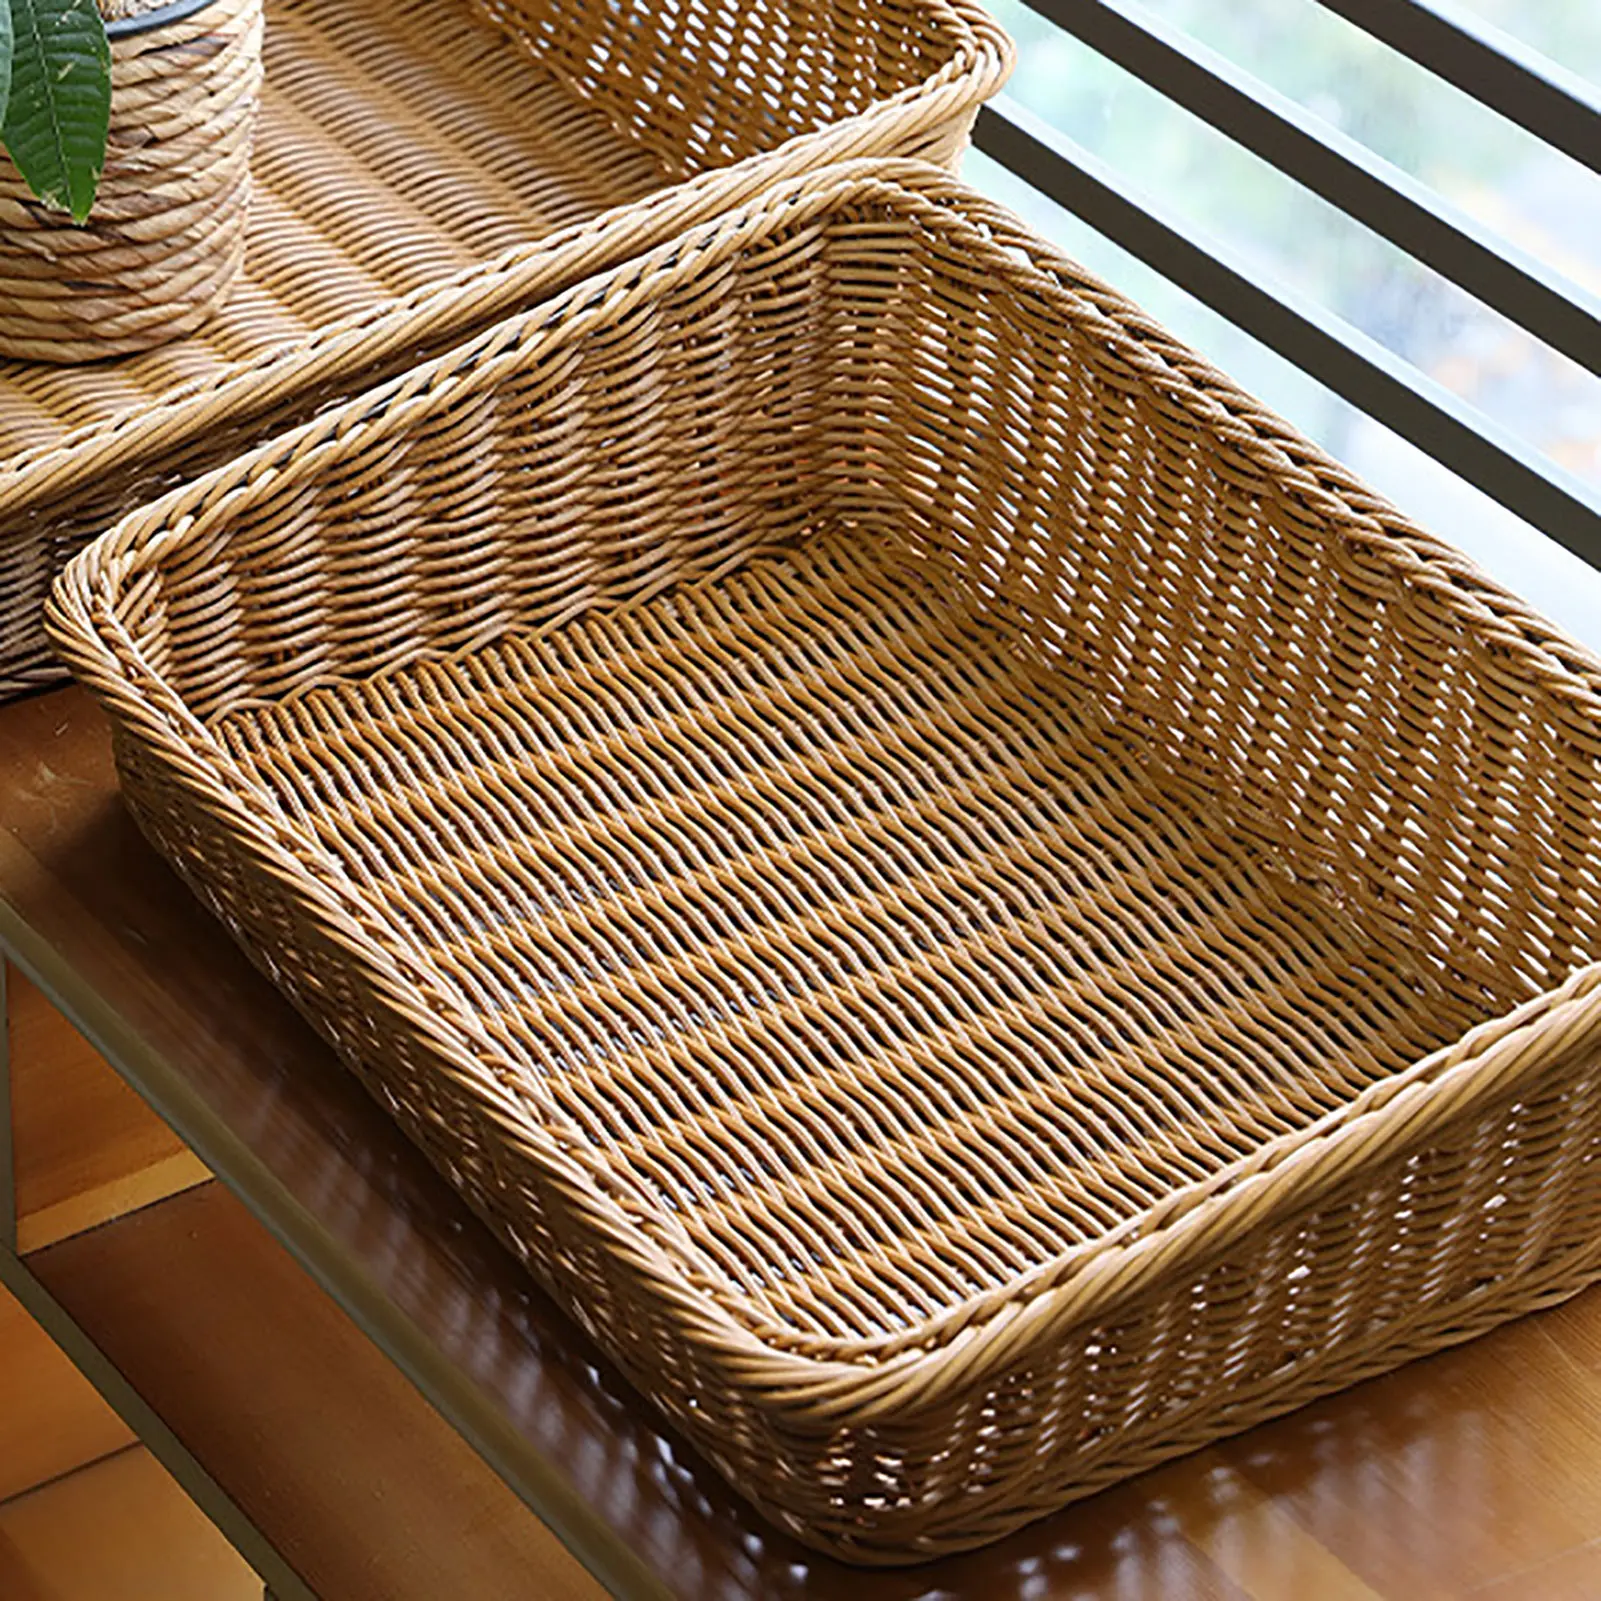 Artificial Rattan Wicker Hand-woven Storage Basket Tray Food Fruit Bread Snack Plate Bathroom Home Cosmetic Sundries Organizer